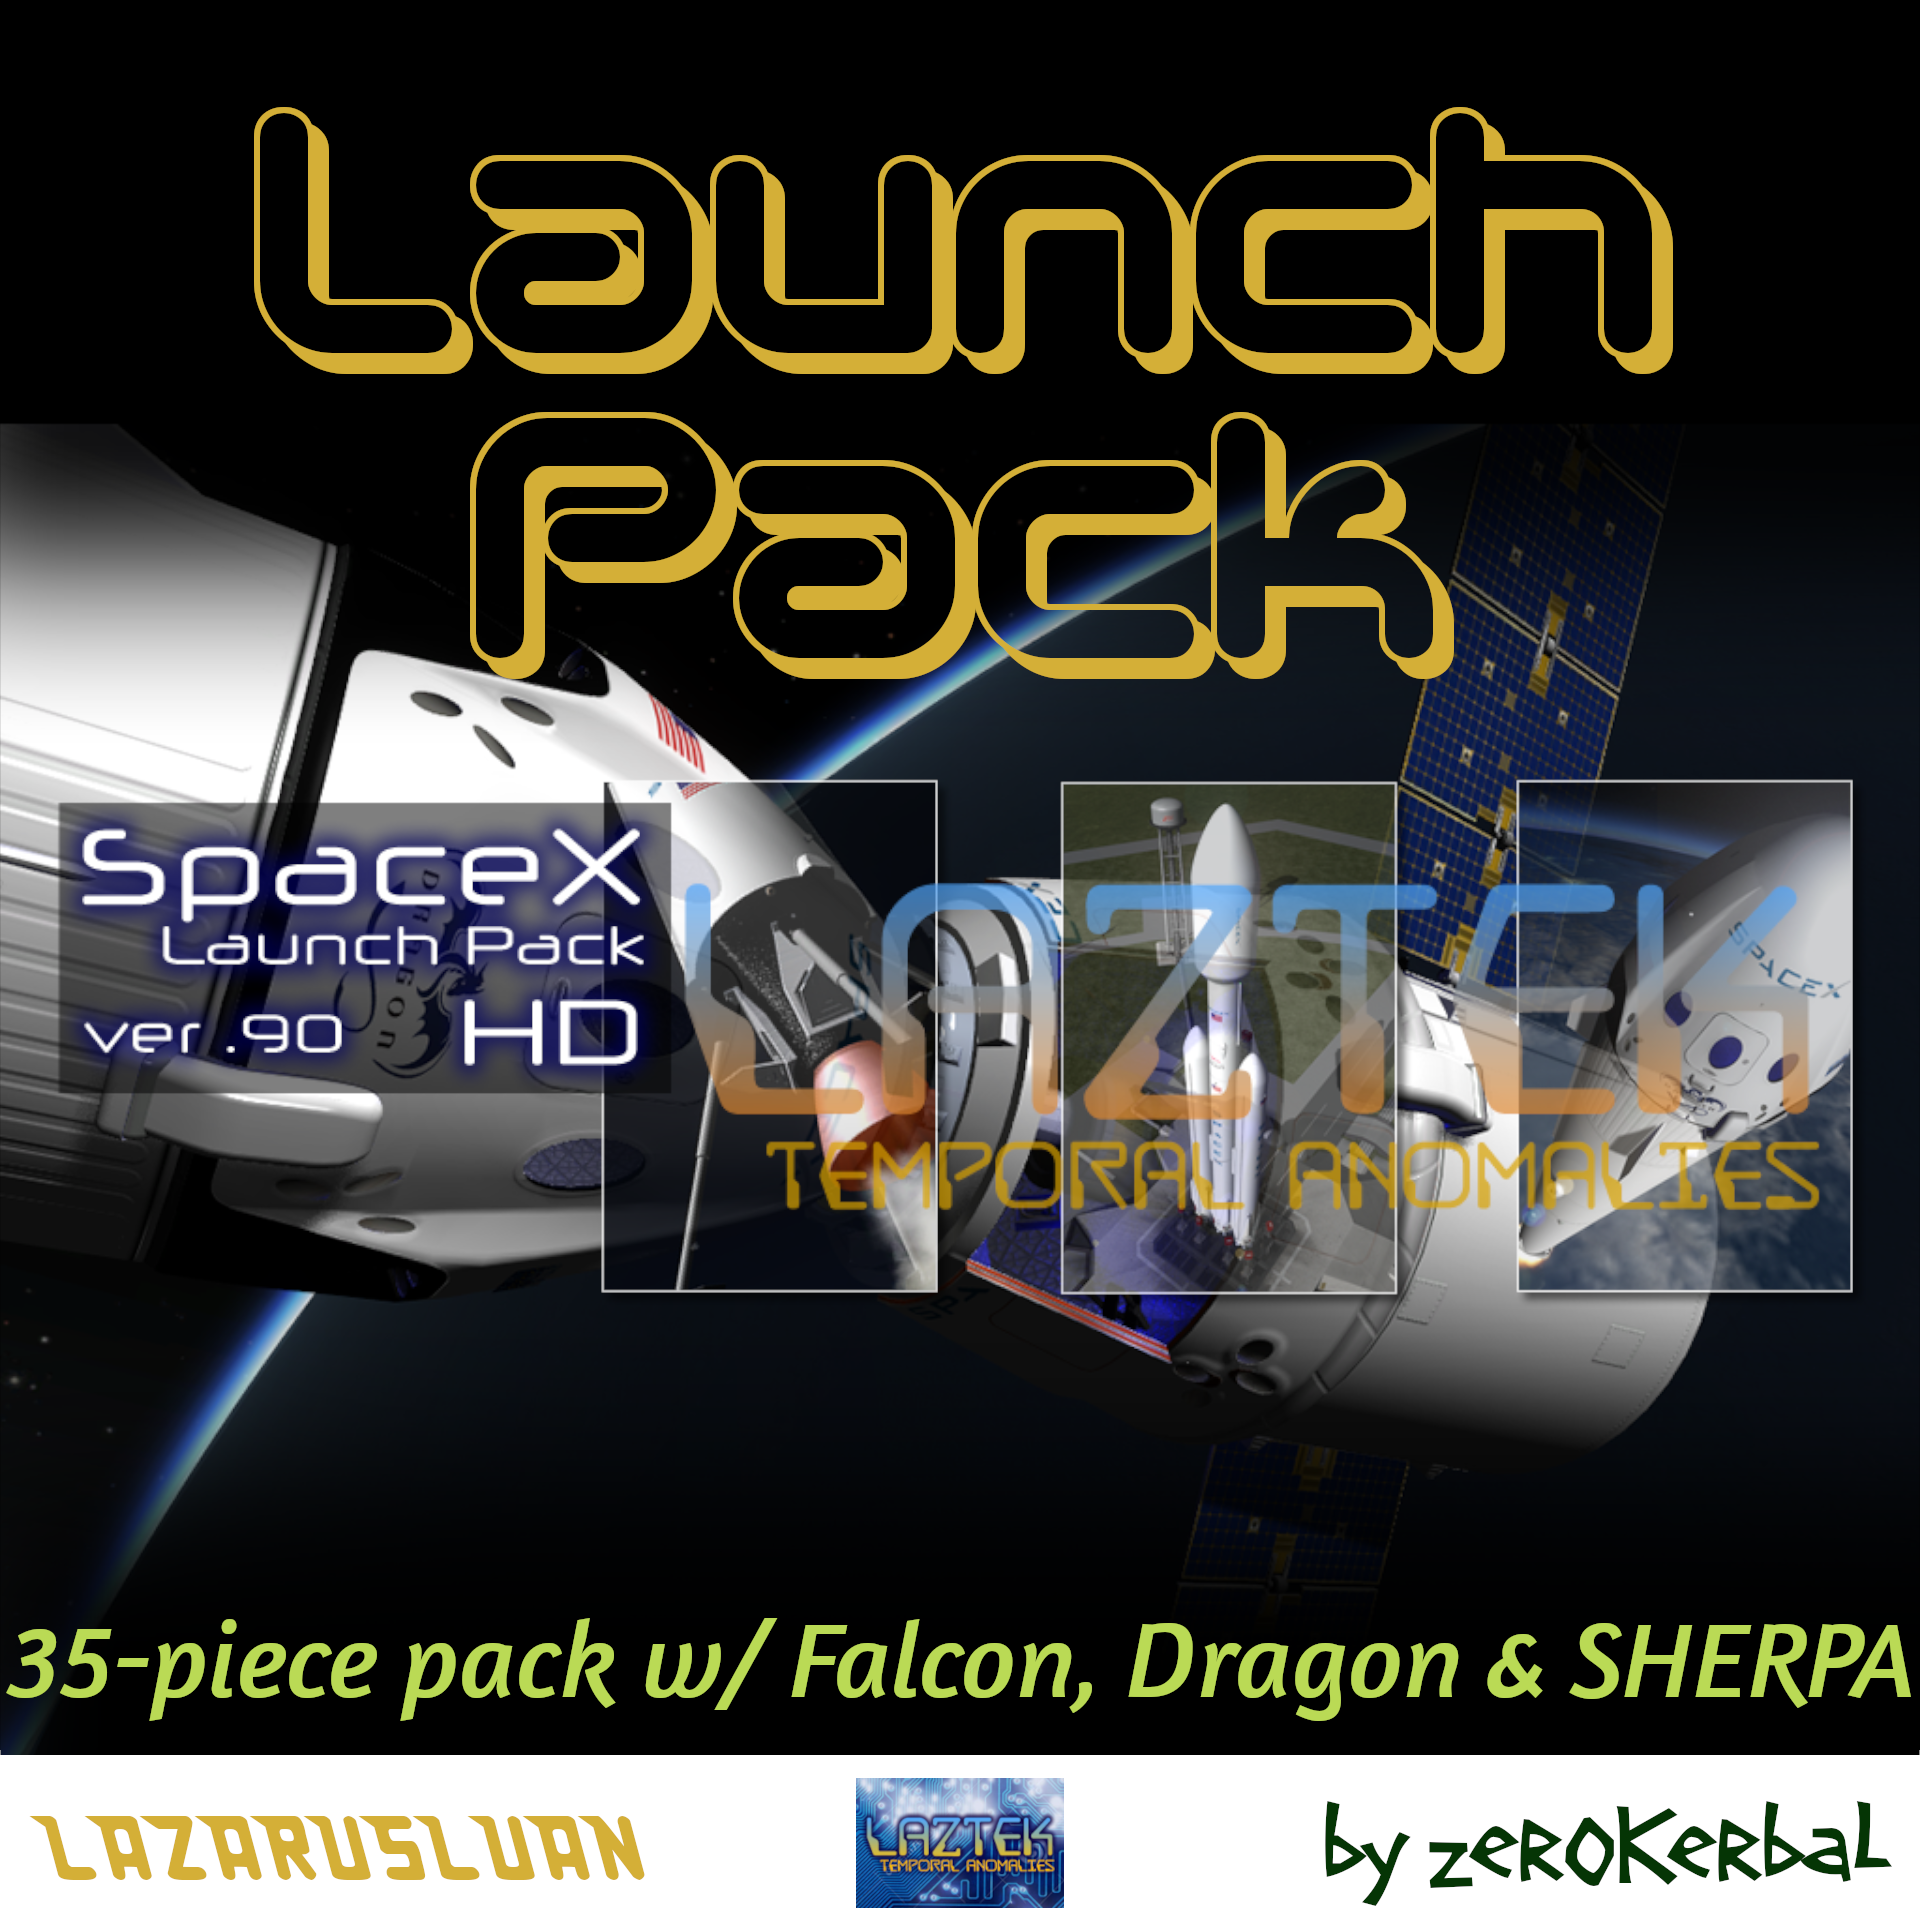 SpaceX Launch Pack (LLP) by LazarusLuan project avatar